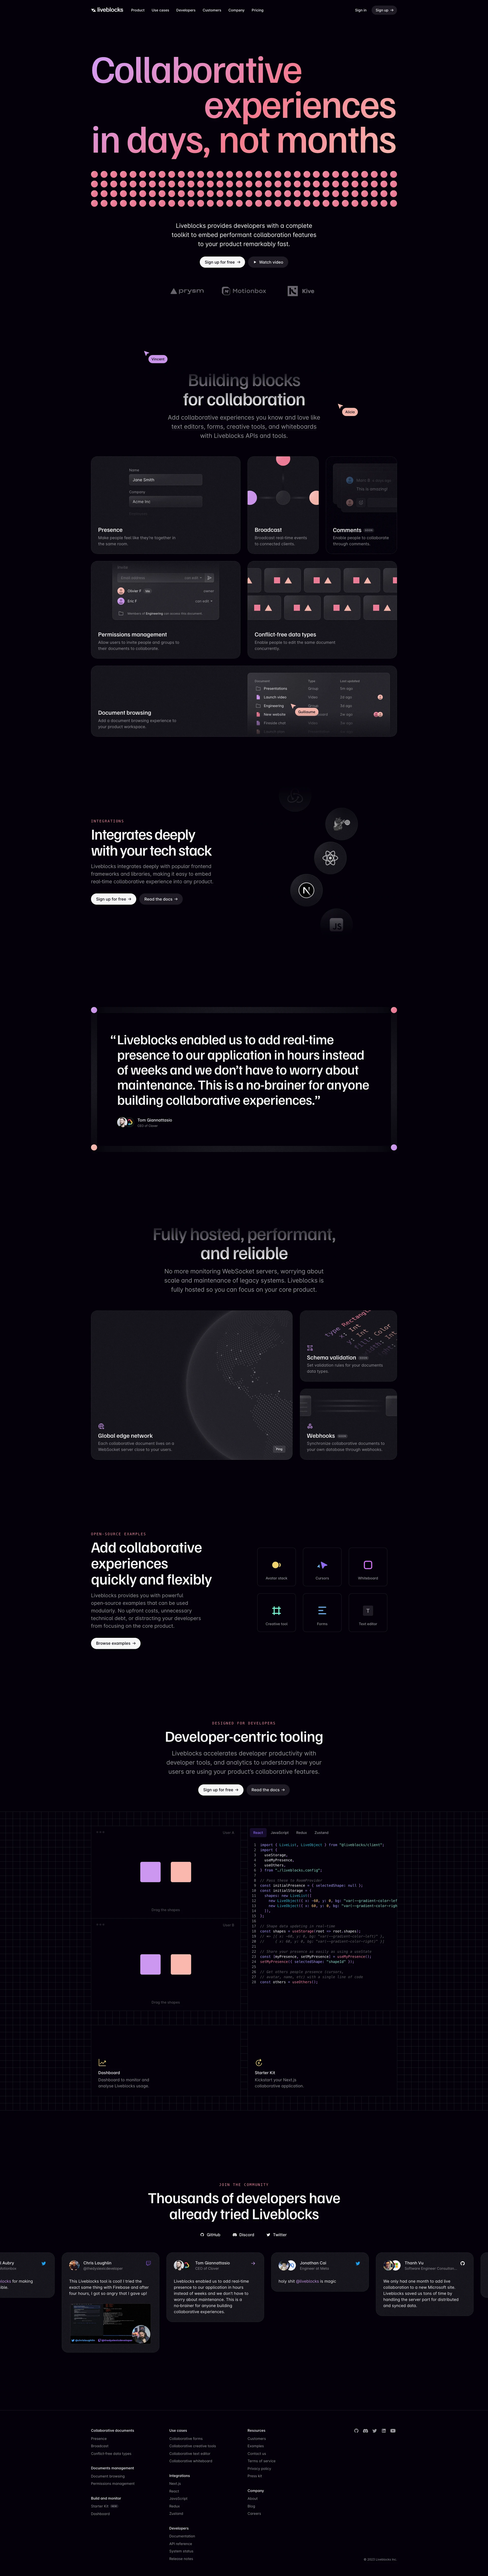 Liveblocks Landing Page Example: Liveblocks provides developers with a complete toolkit to embed performant collaboration features to your product in days, not months.